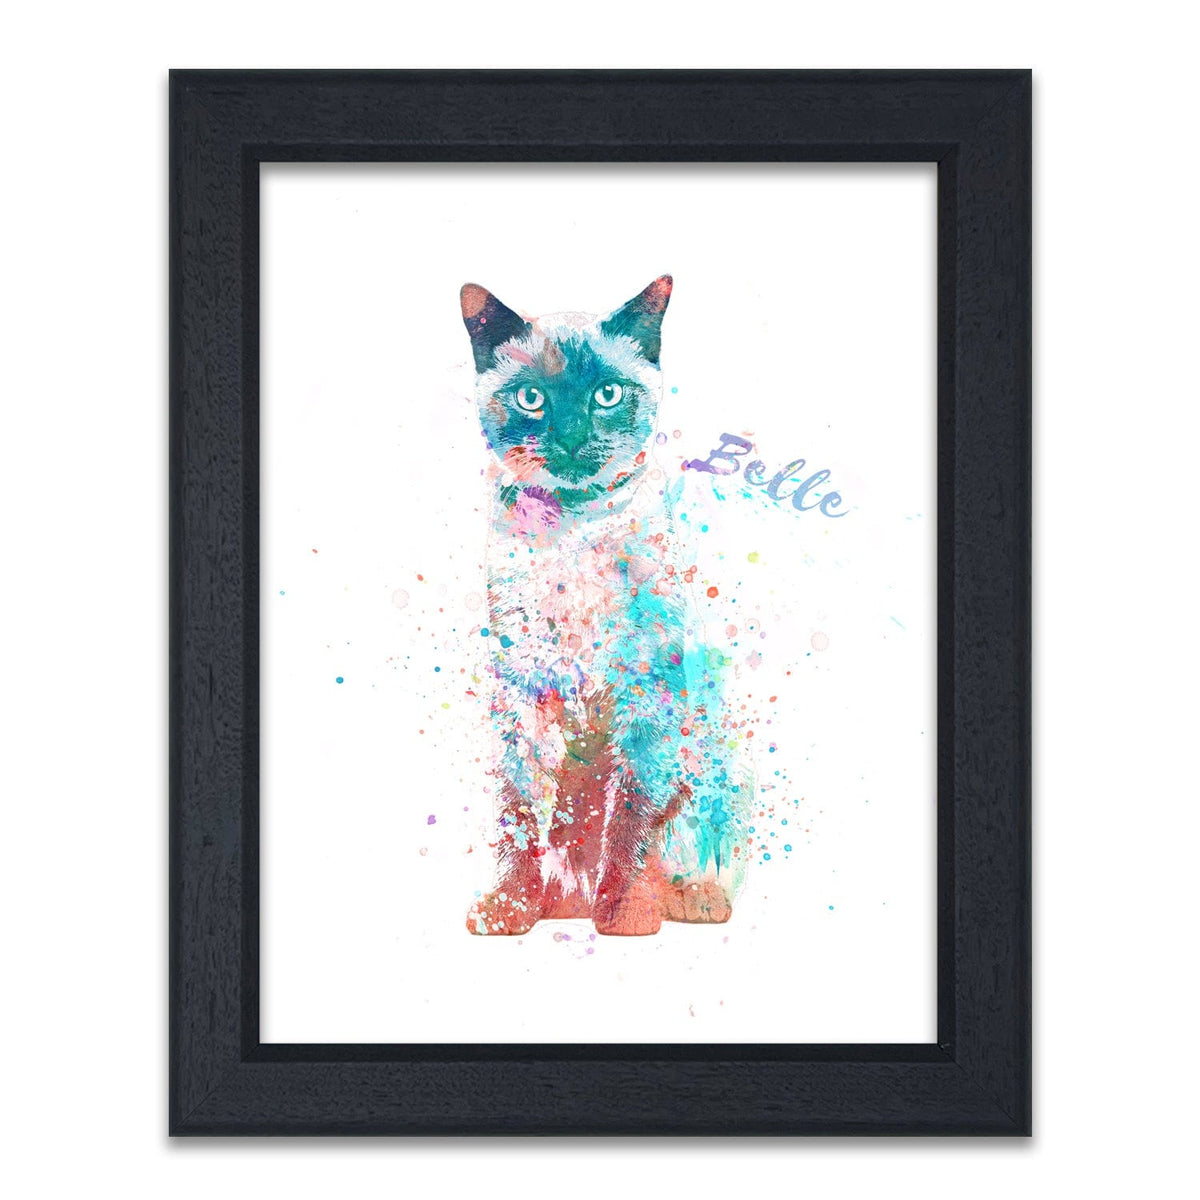 Siamese Cat Framed Art Personalized Gift from Personal-Prints